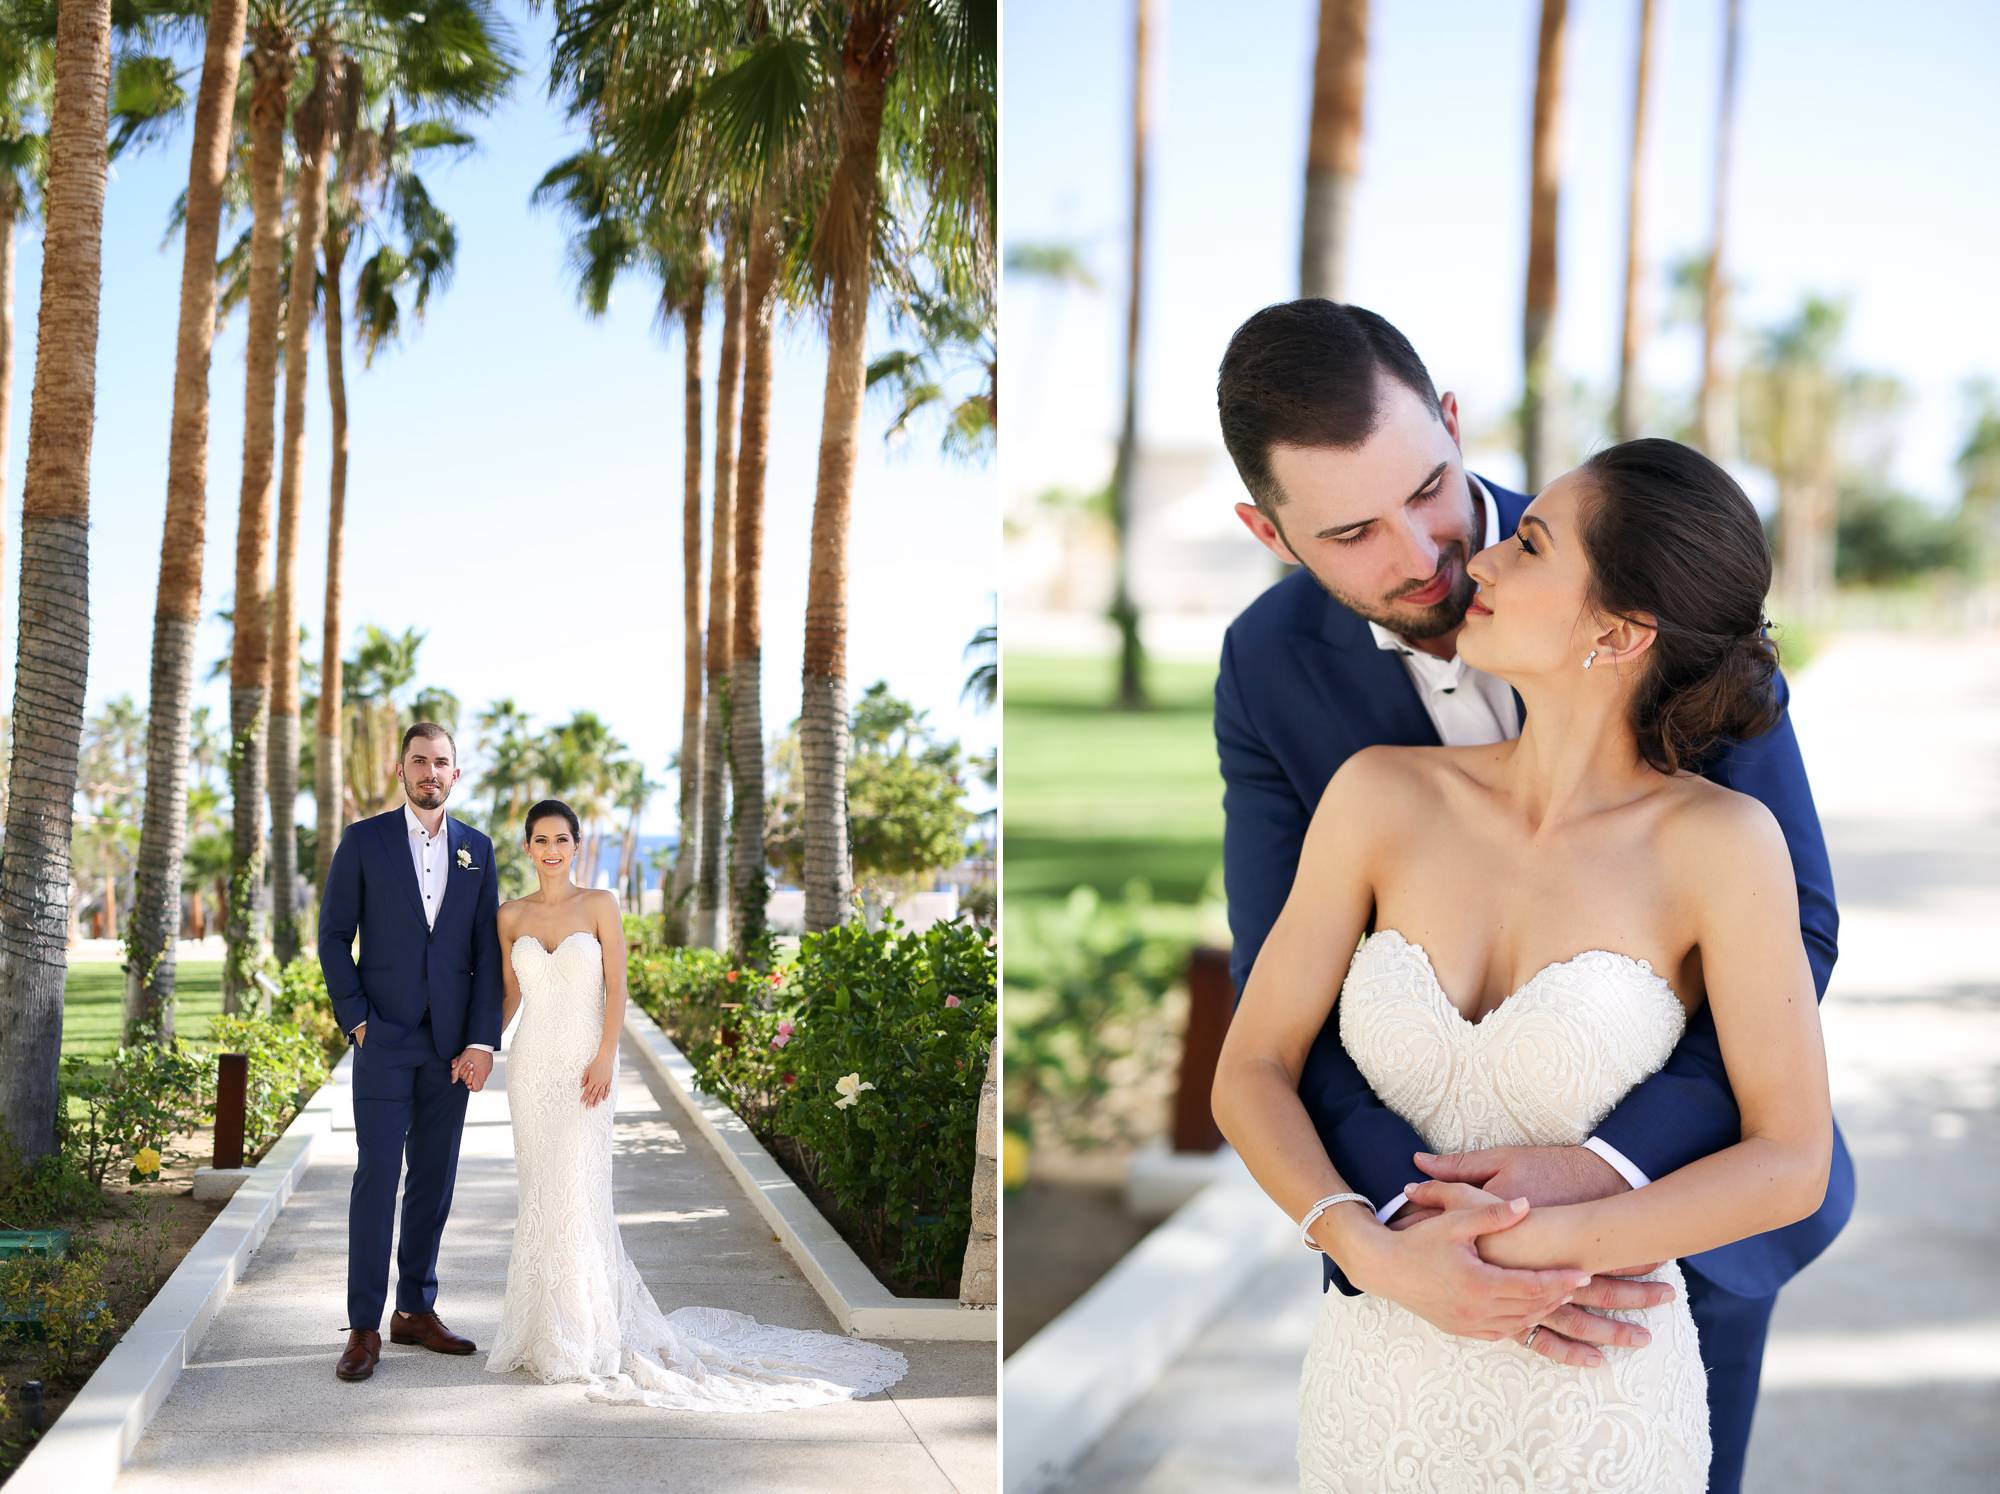 Bride in Mori Lee sheath lace dress and groom in blue suit